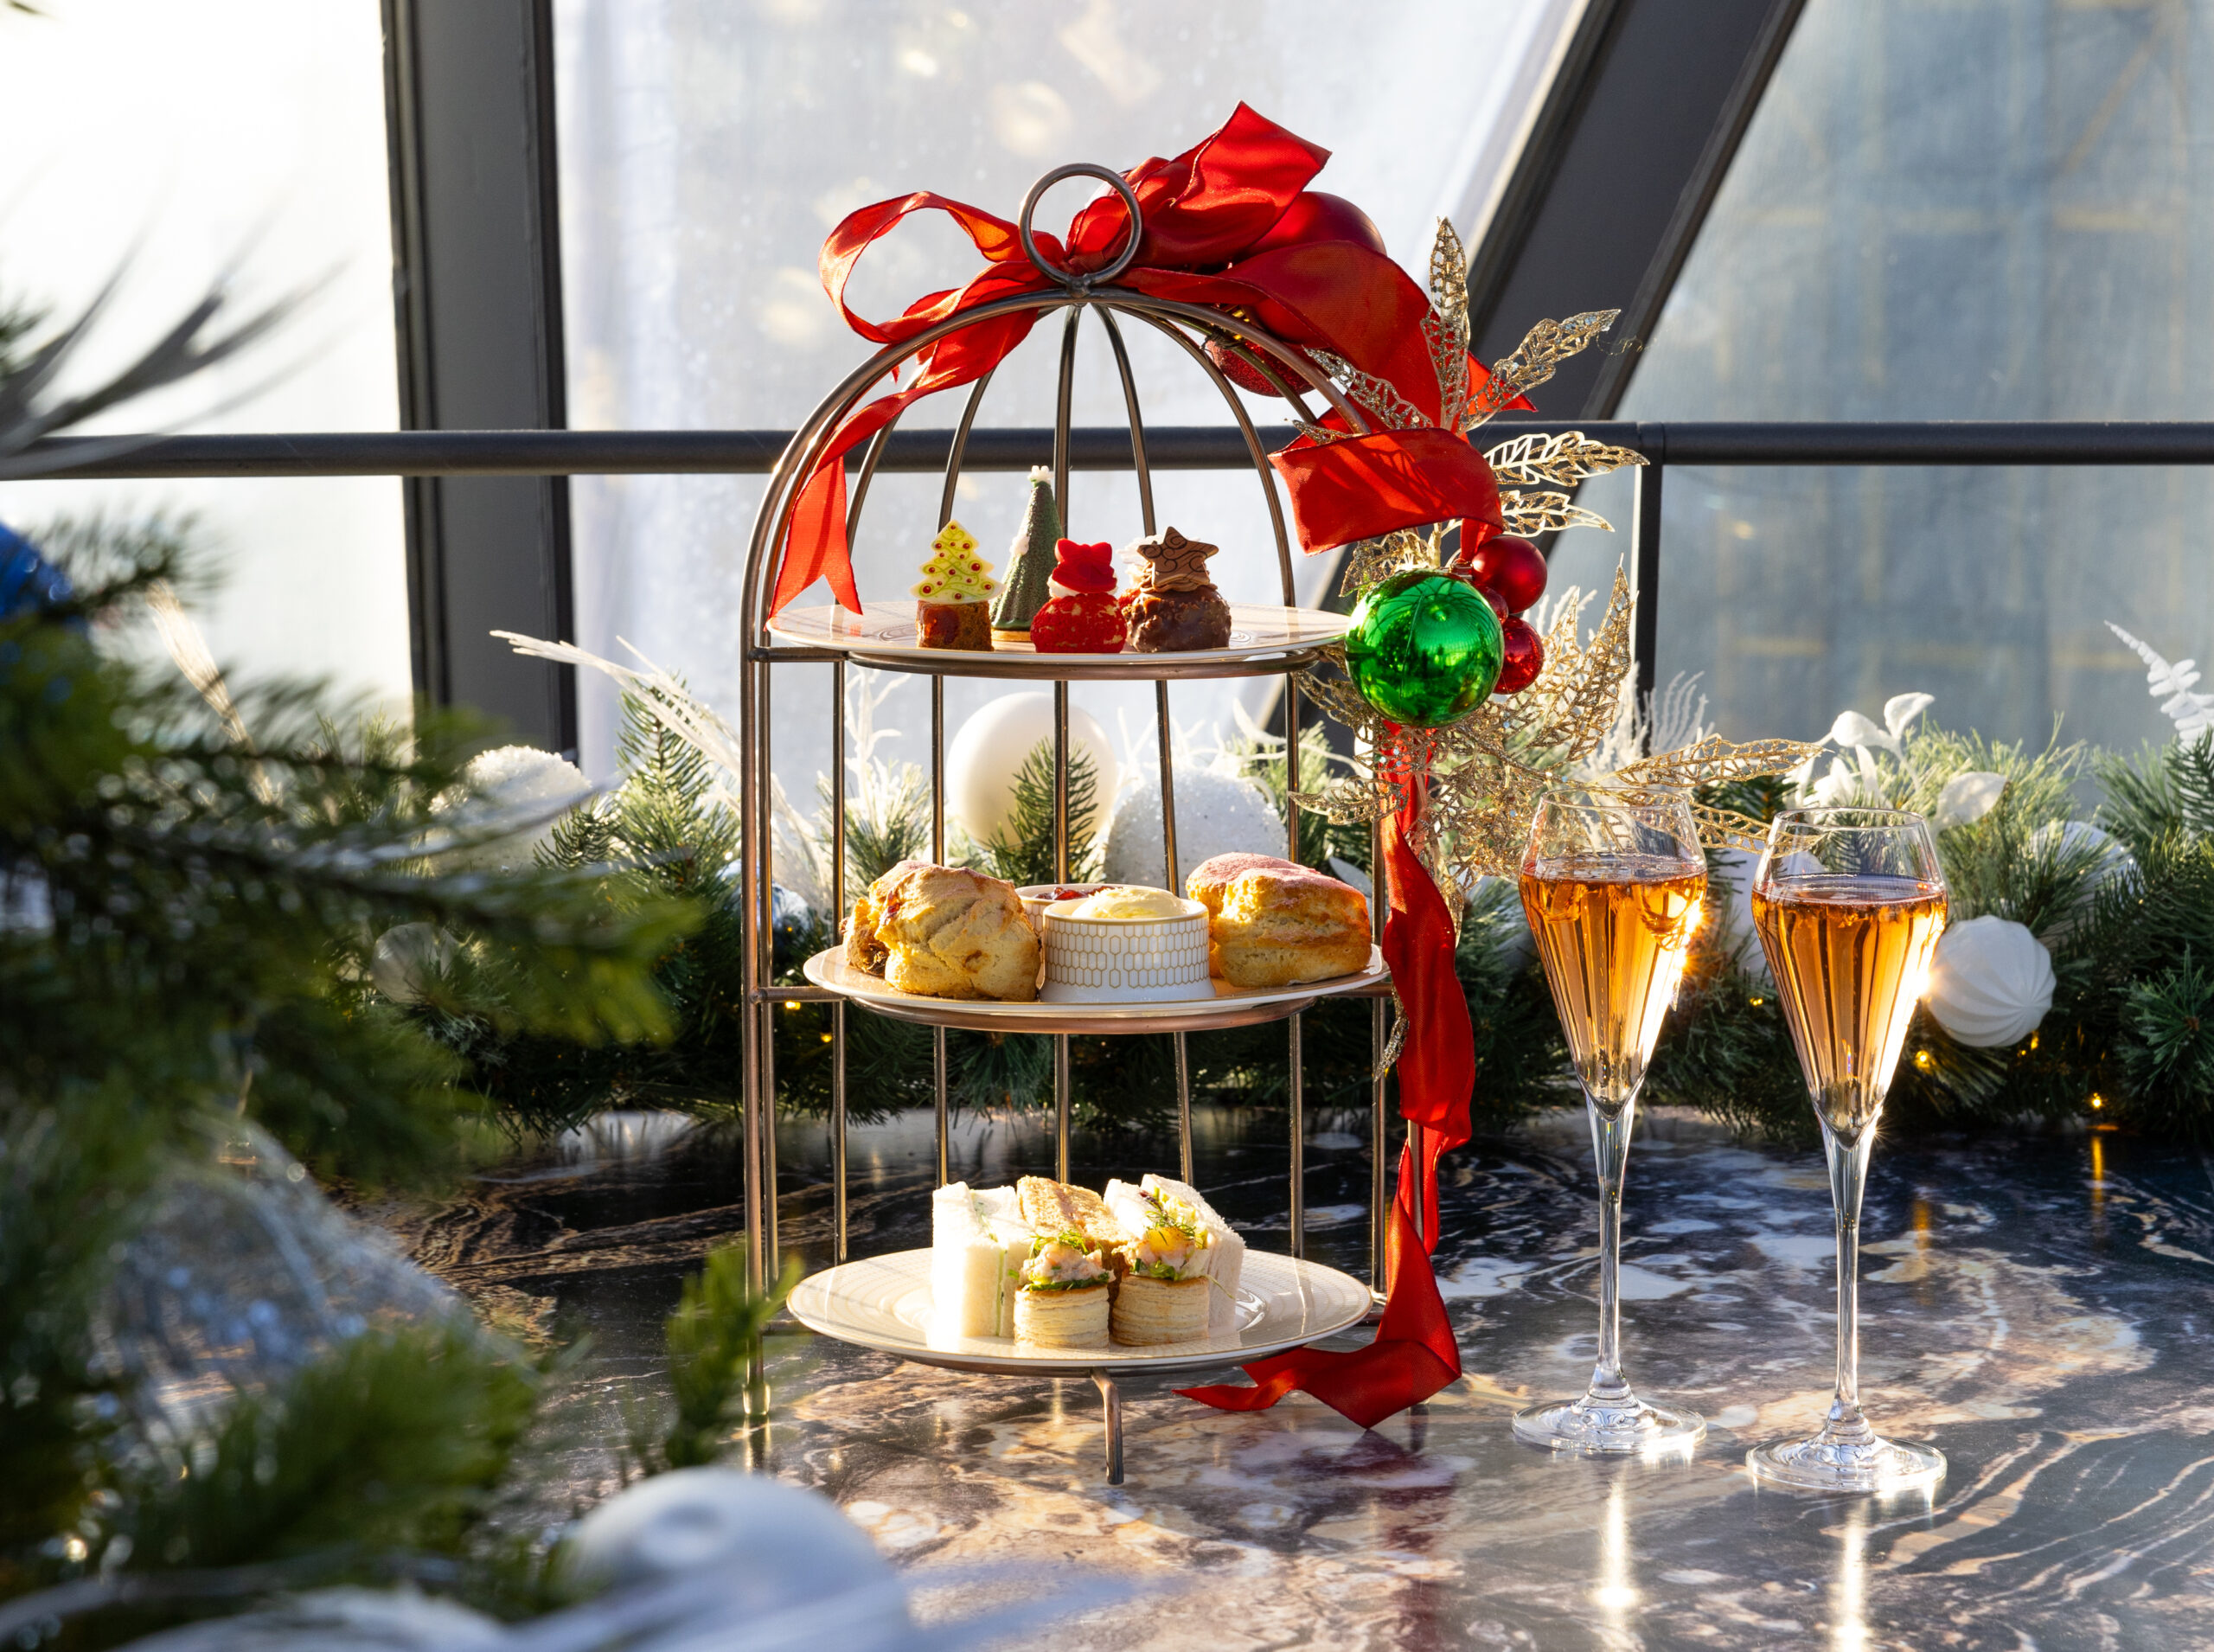 New Year’s Eve Afternoon Tea - Searcys at the Gherkin